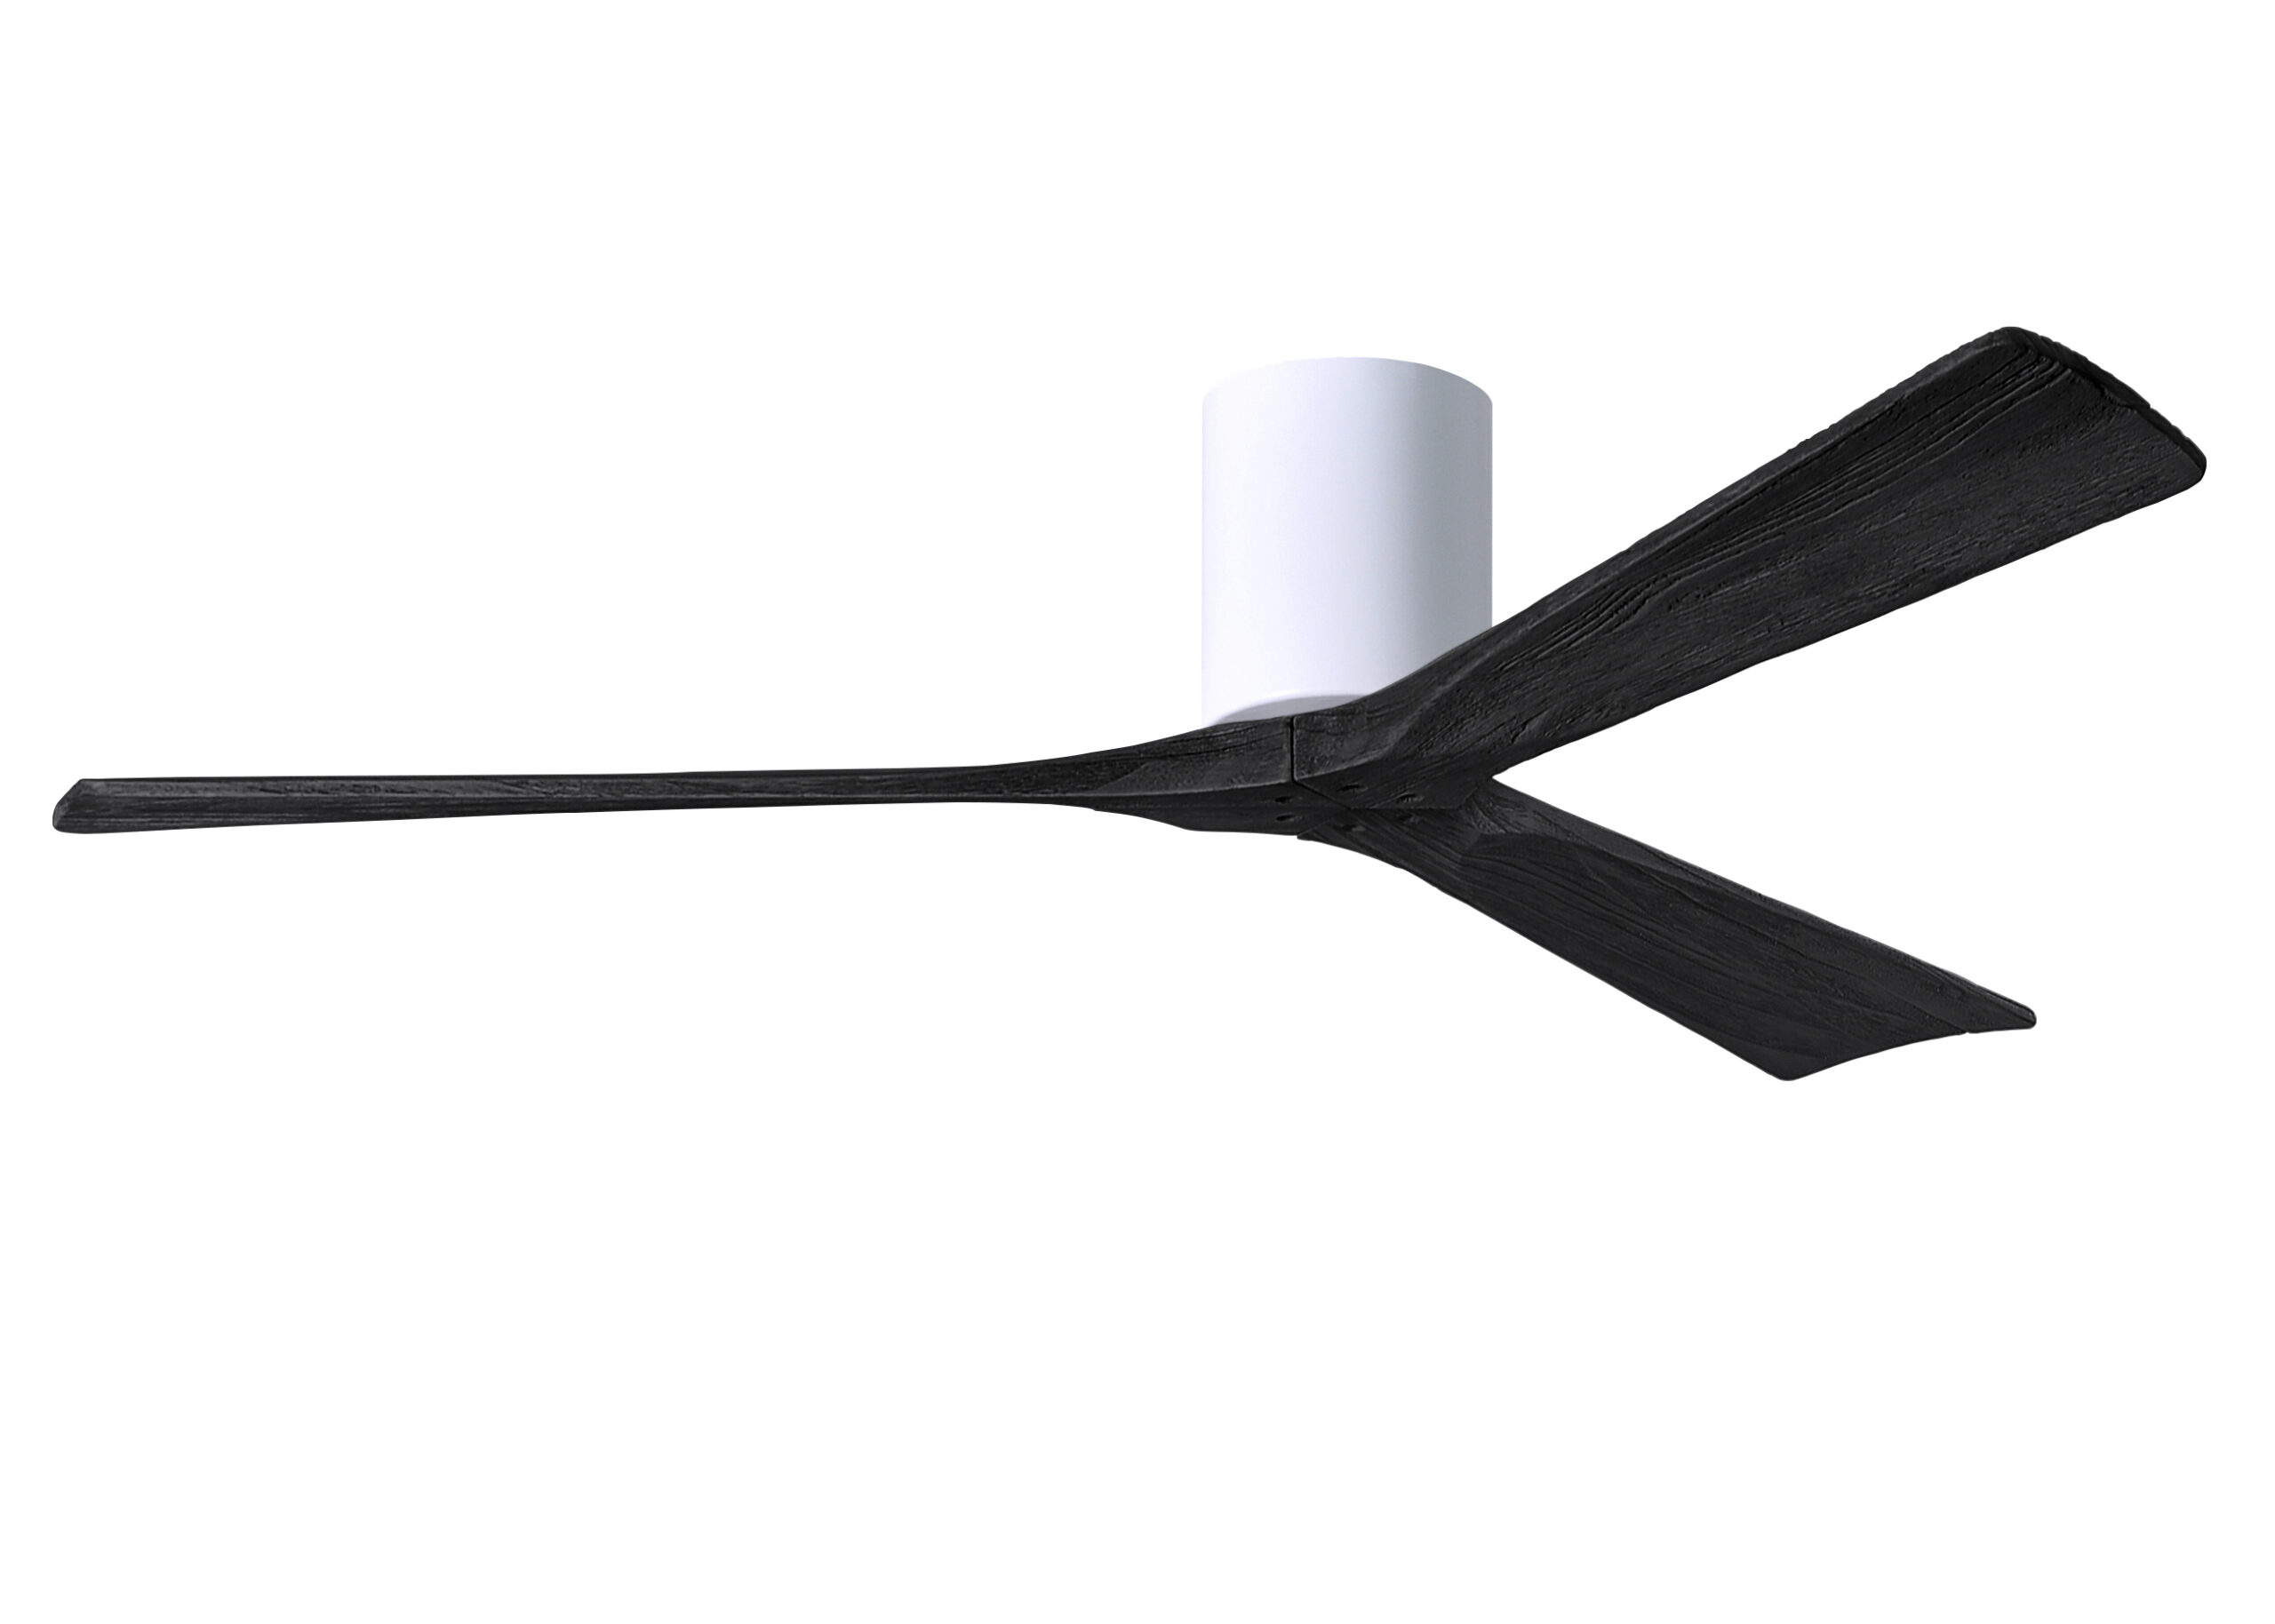 Irene-3H Ceiling Fan in Gloss White Finish with 60